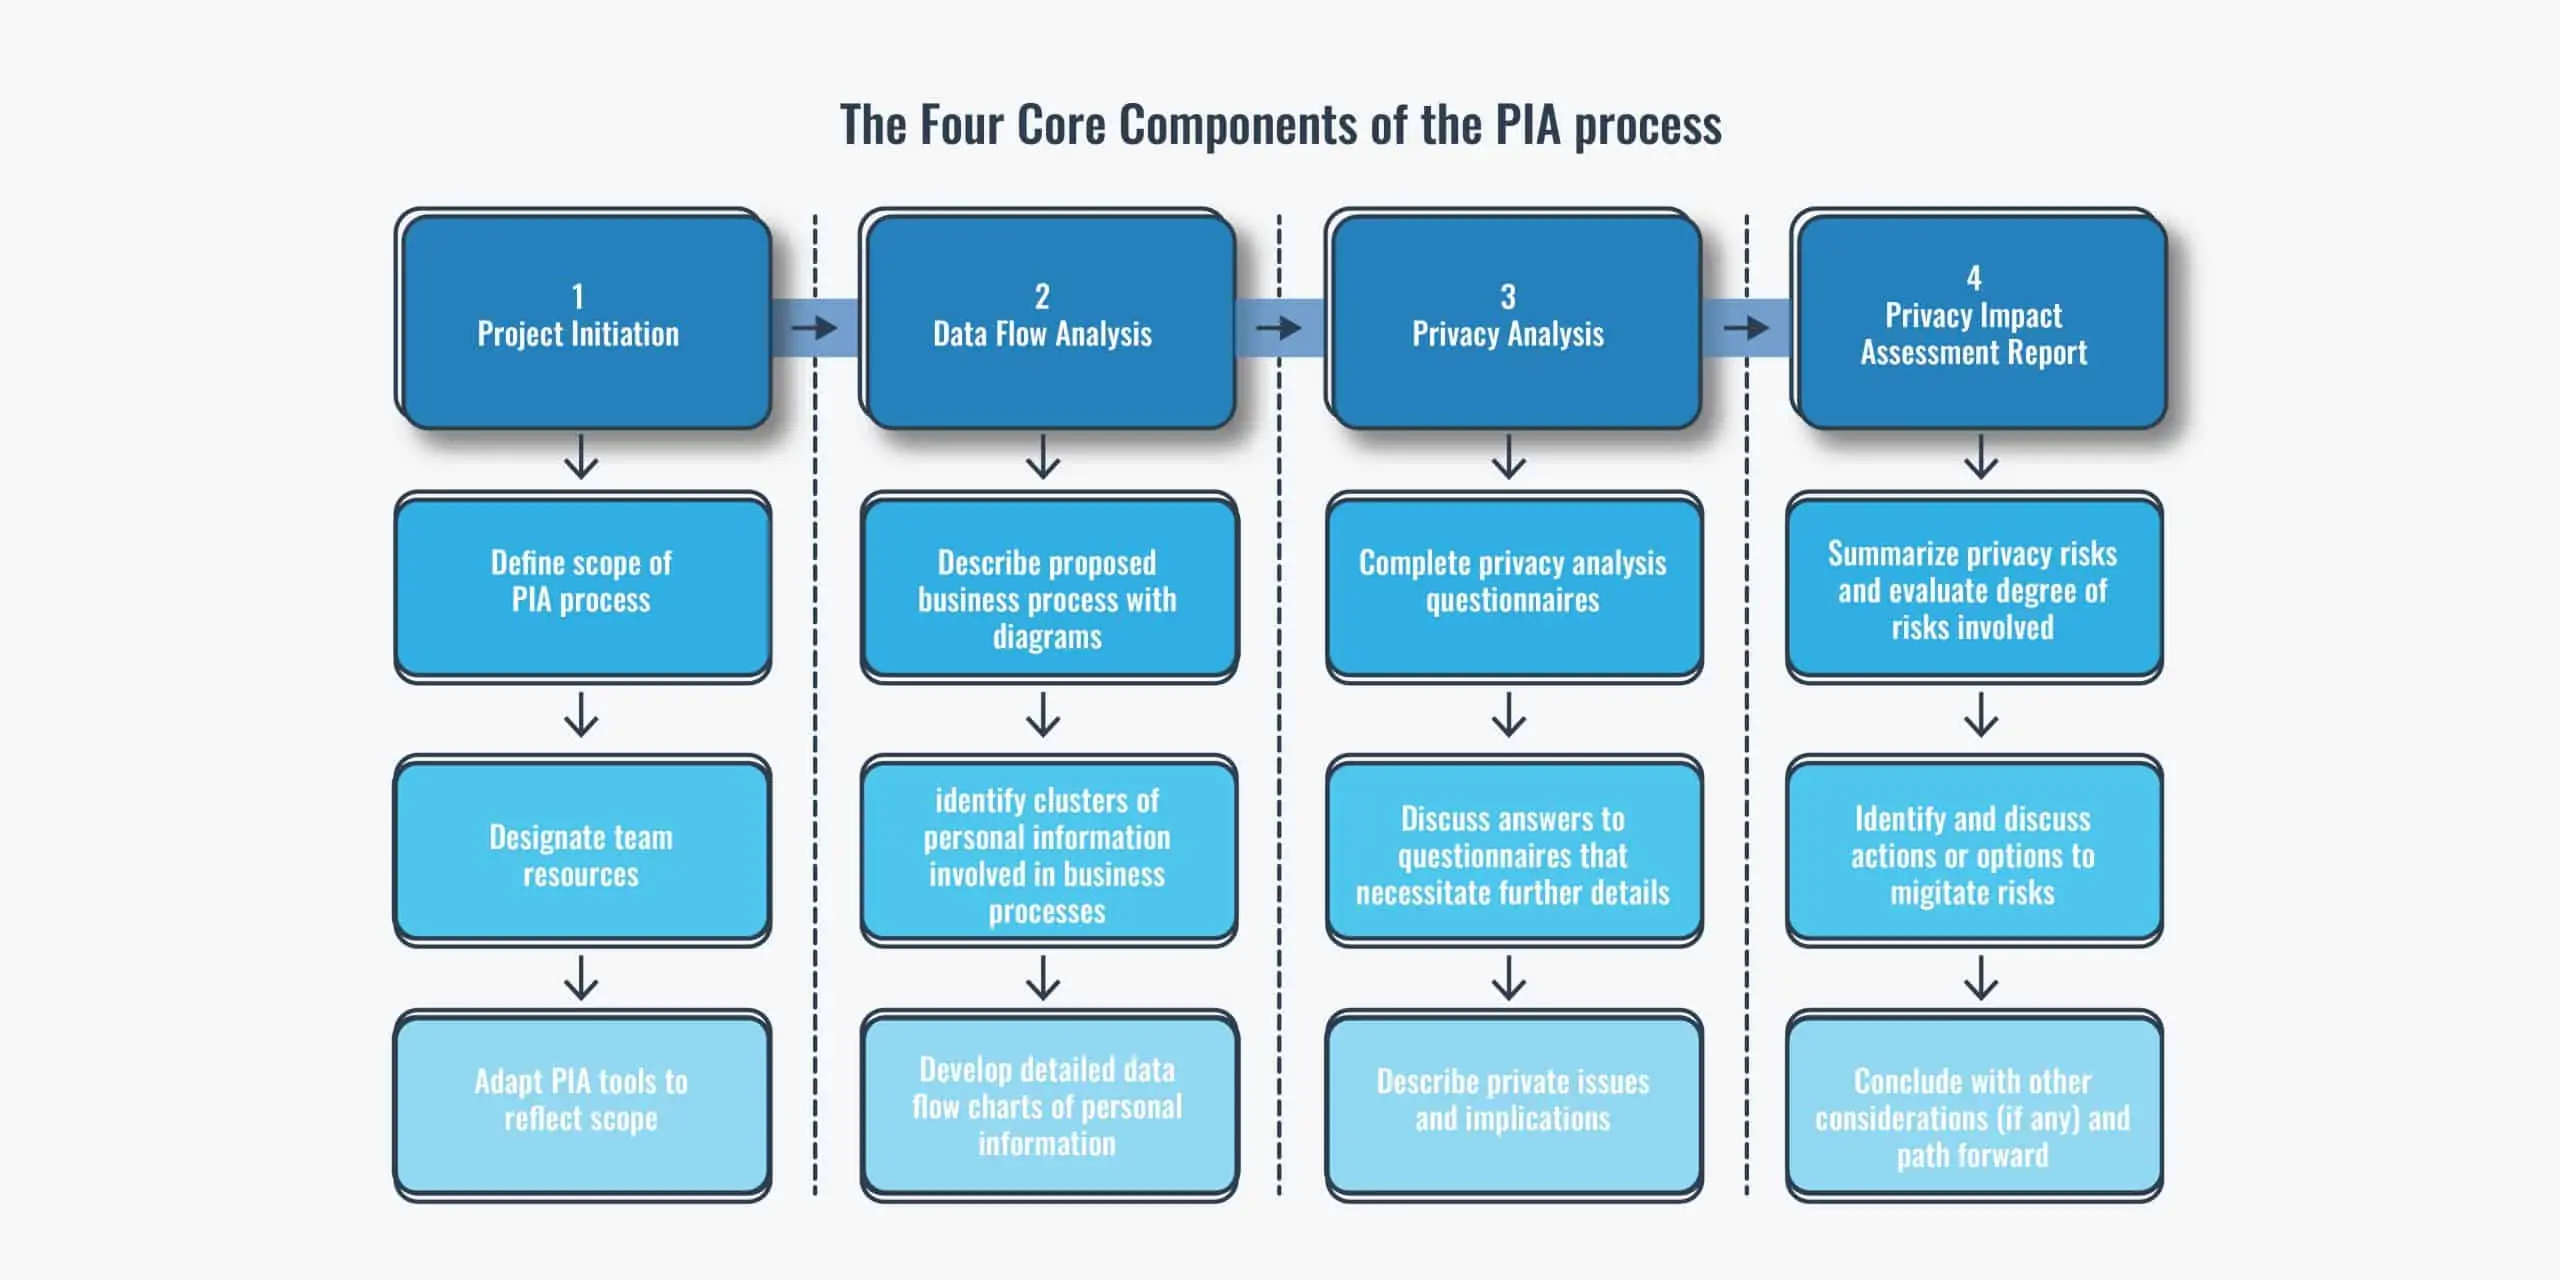 Diagram showing the four core components of the PIA process